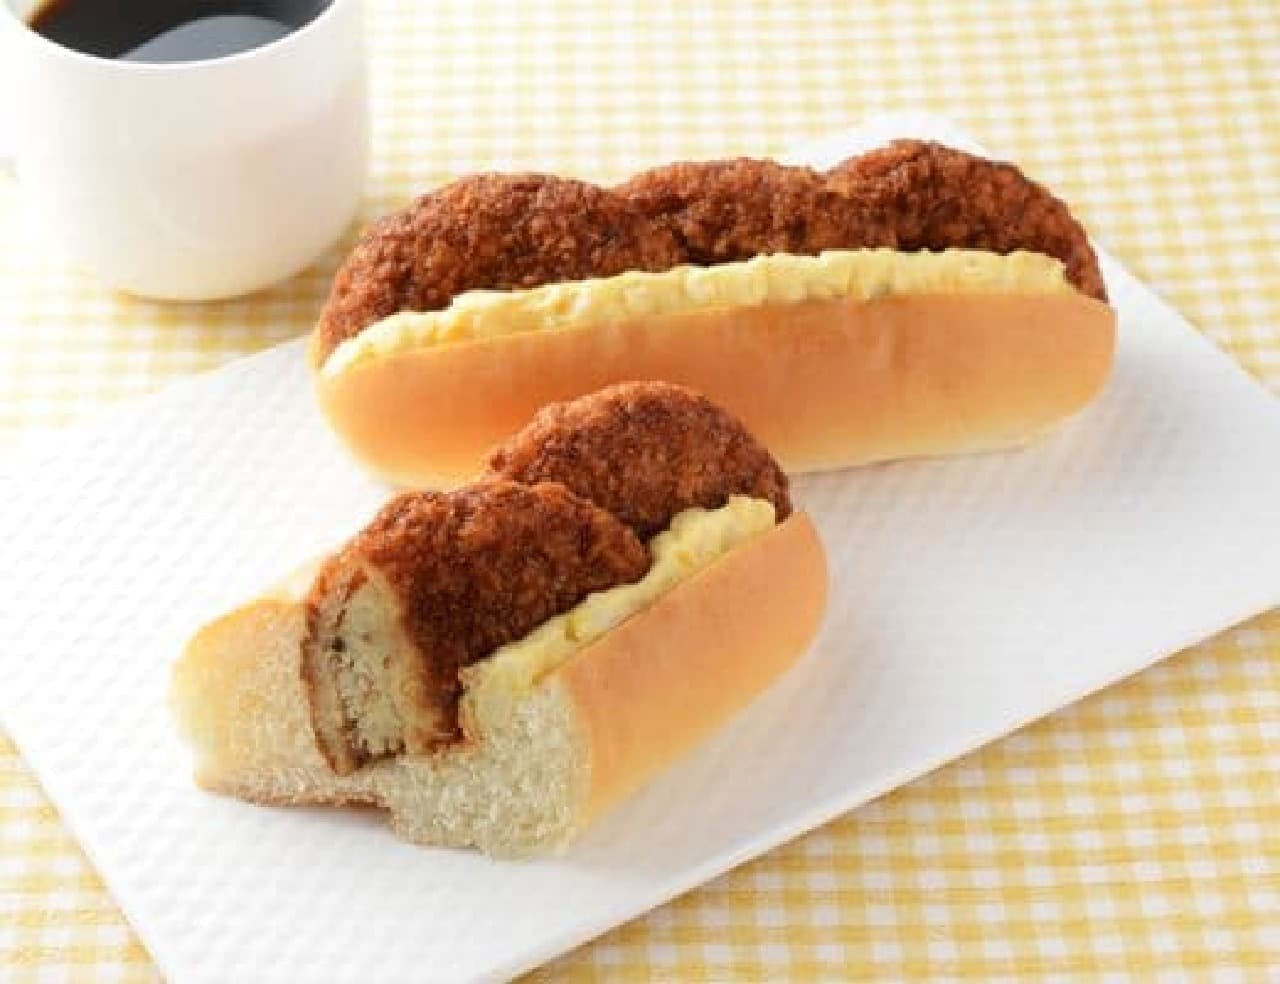 Lawson "croquette bread with beef"